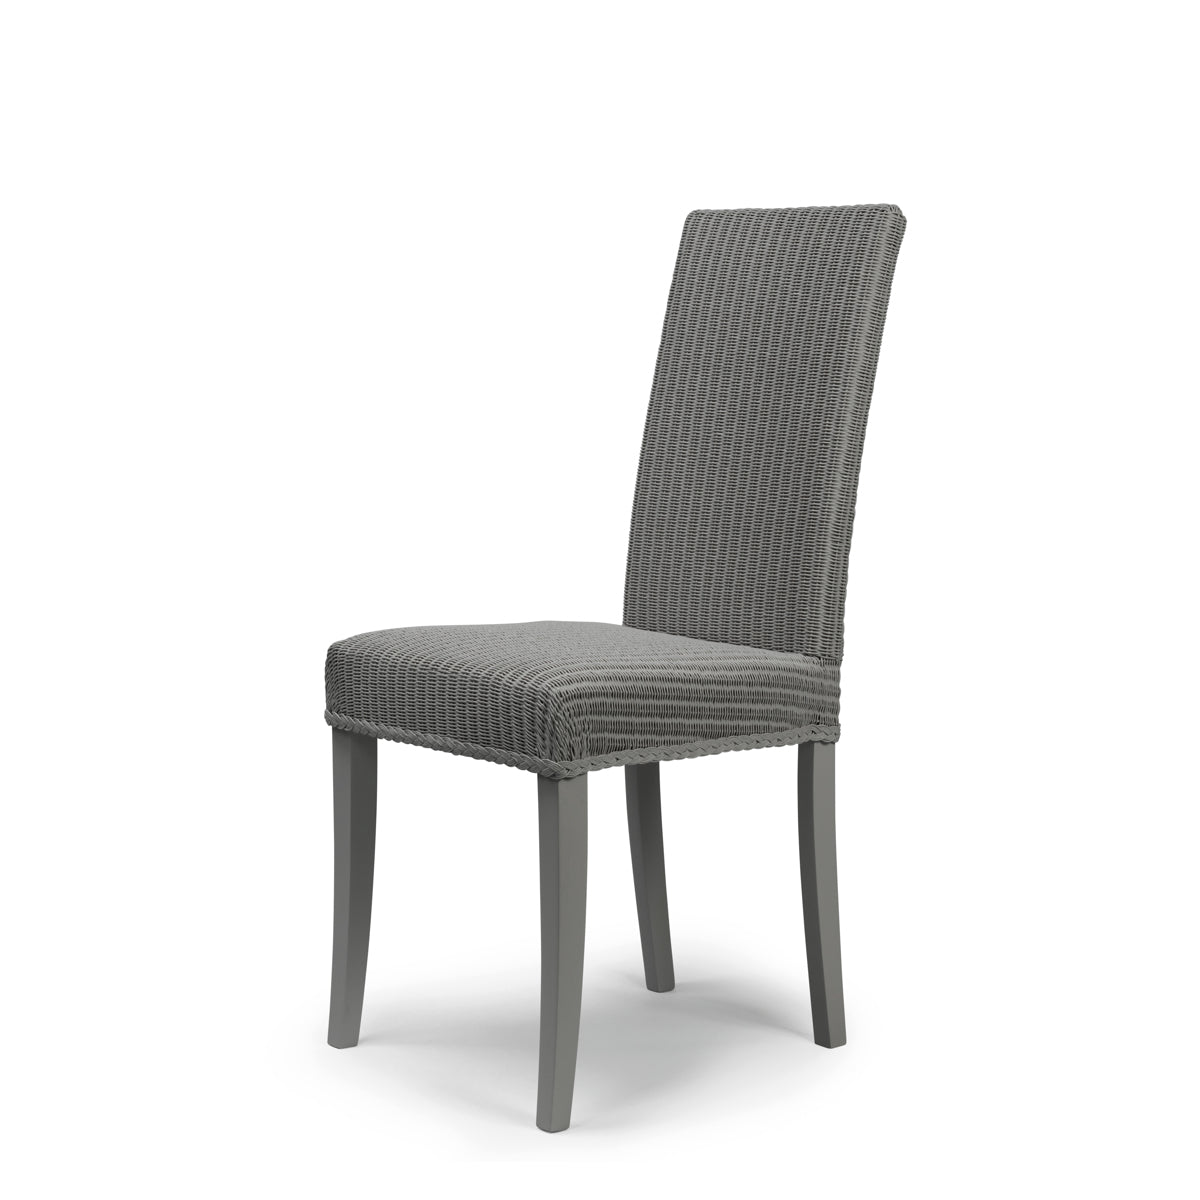 Special Offer Discount - Maybourne Lloyd Loom Dining Chair - set of 8